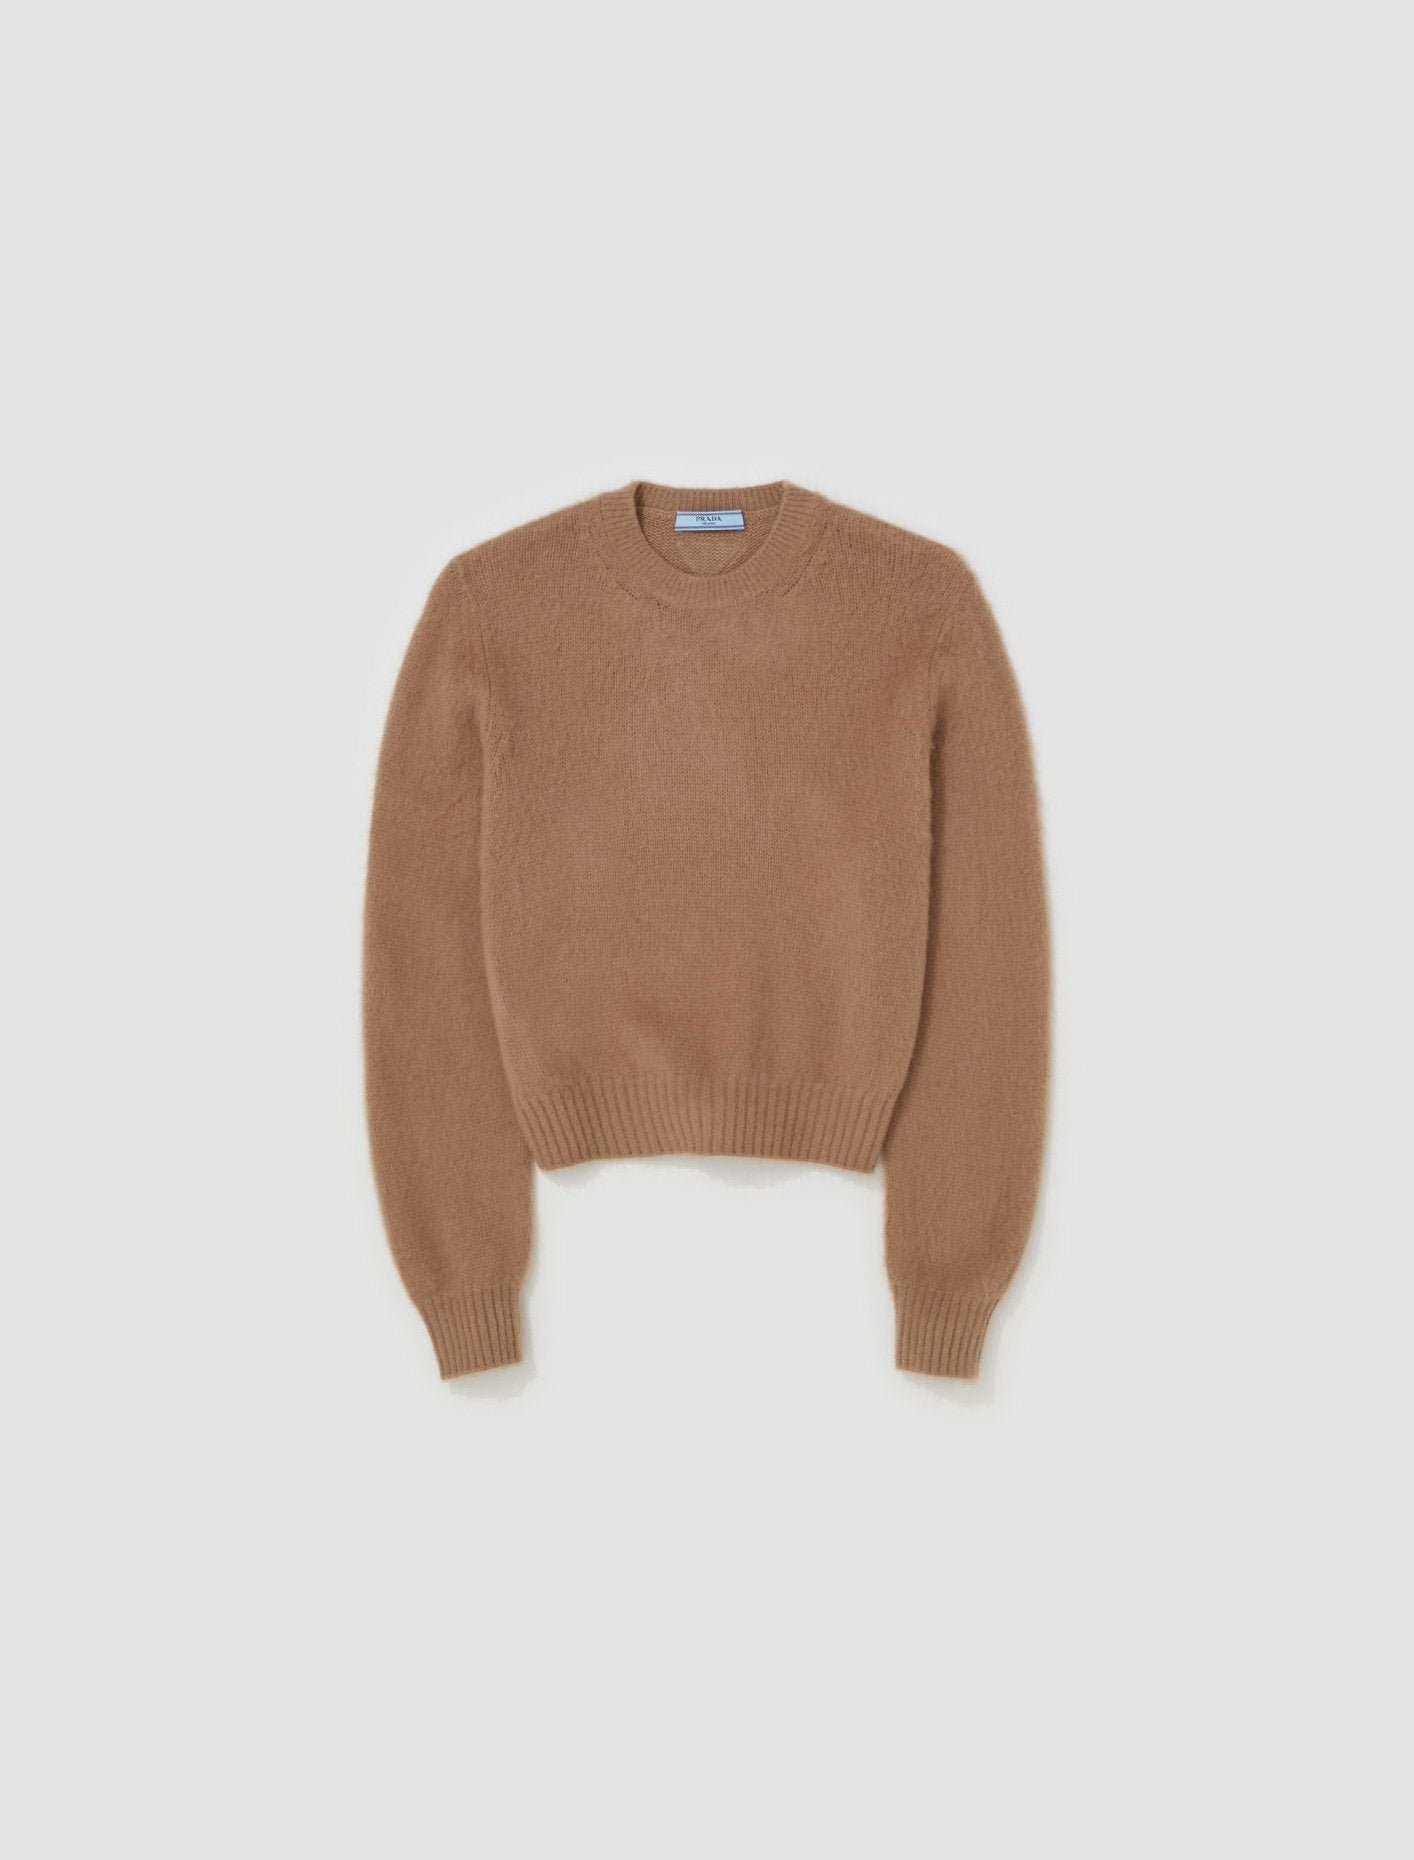 Cashmere Crewneck Sweater in Camel Brown